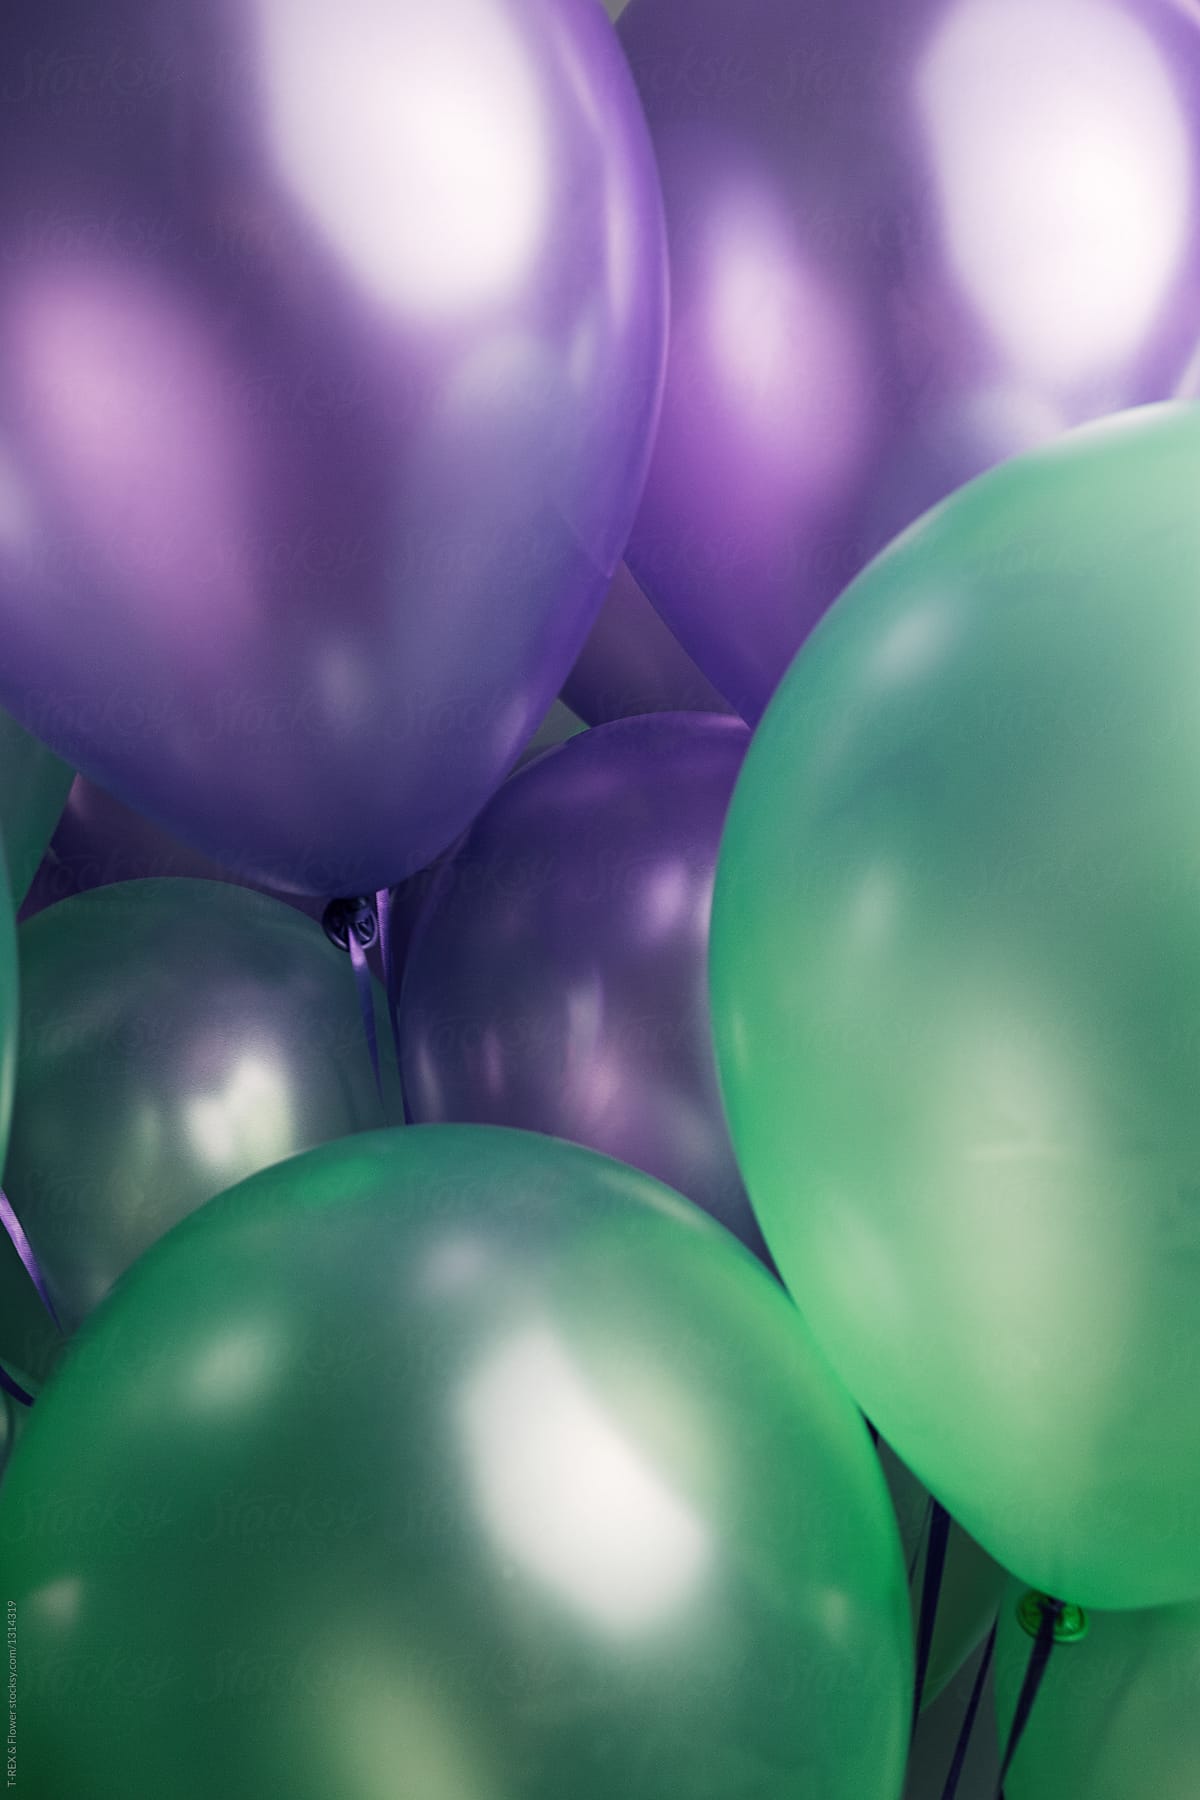 Green and purple balloons